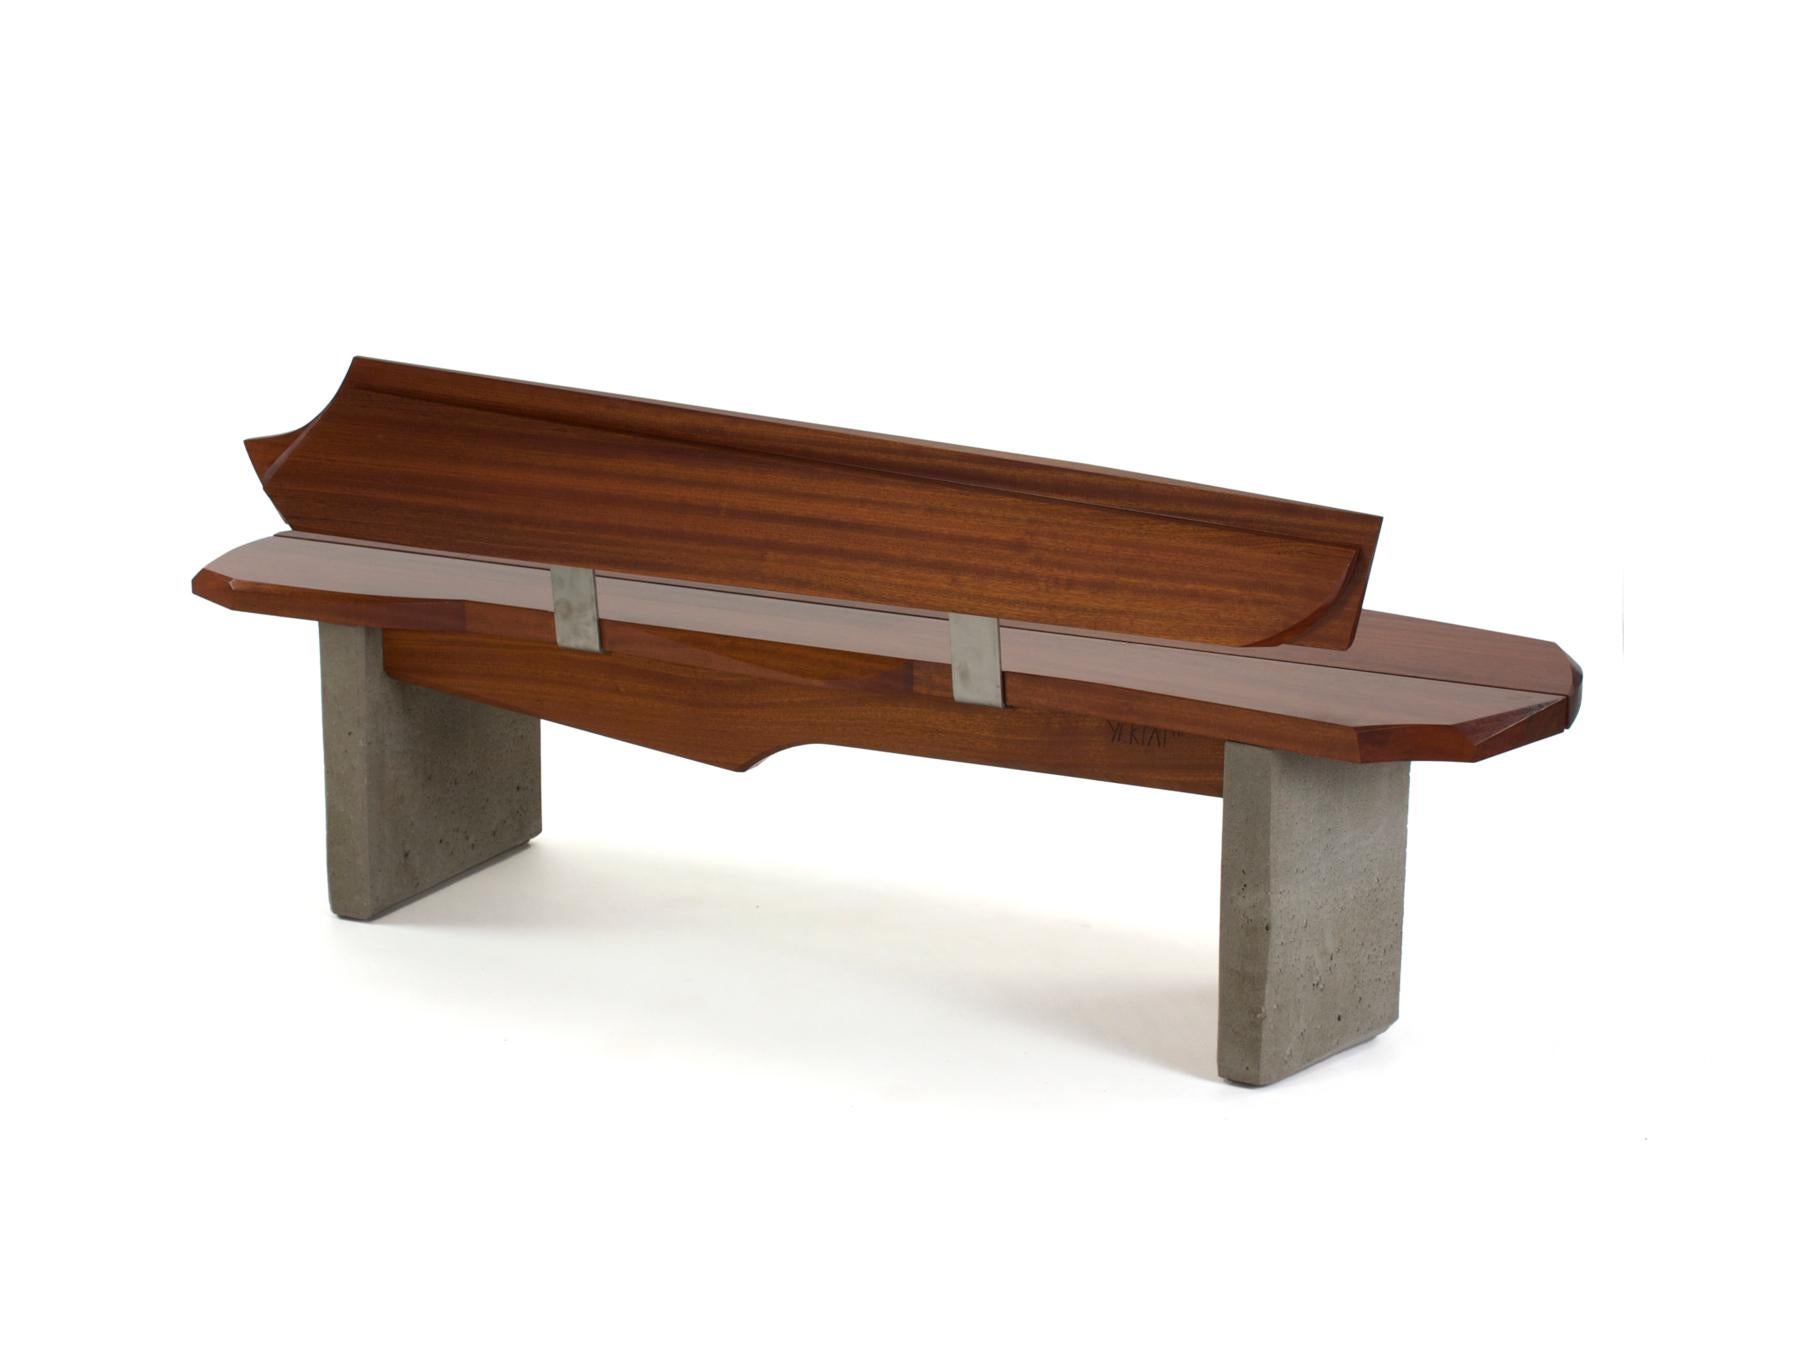 Bench #5 from Series #2 can be the focal point of any indoor or outdoor situation. Pictured above in 72